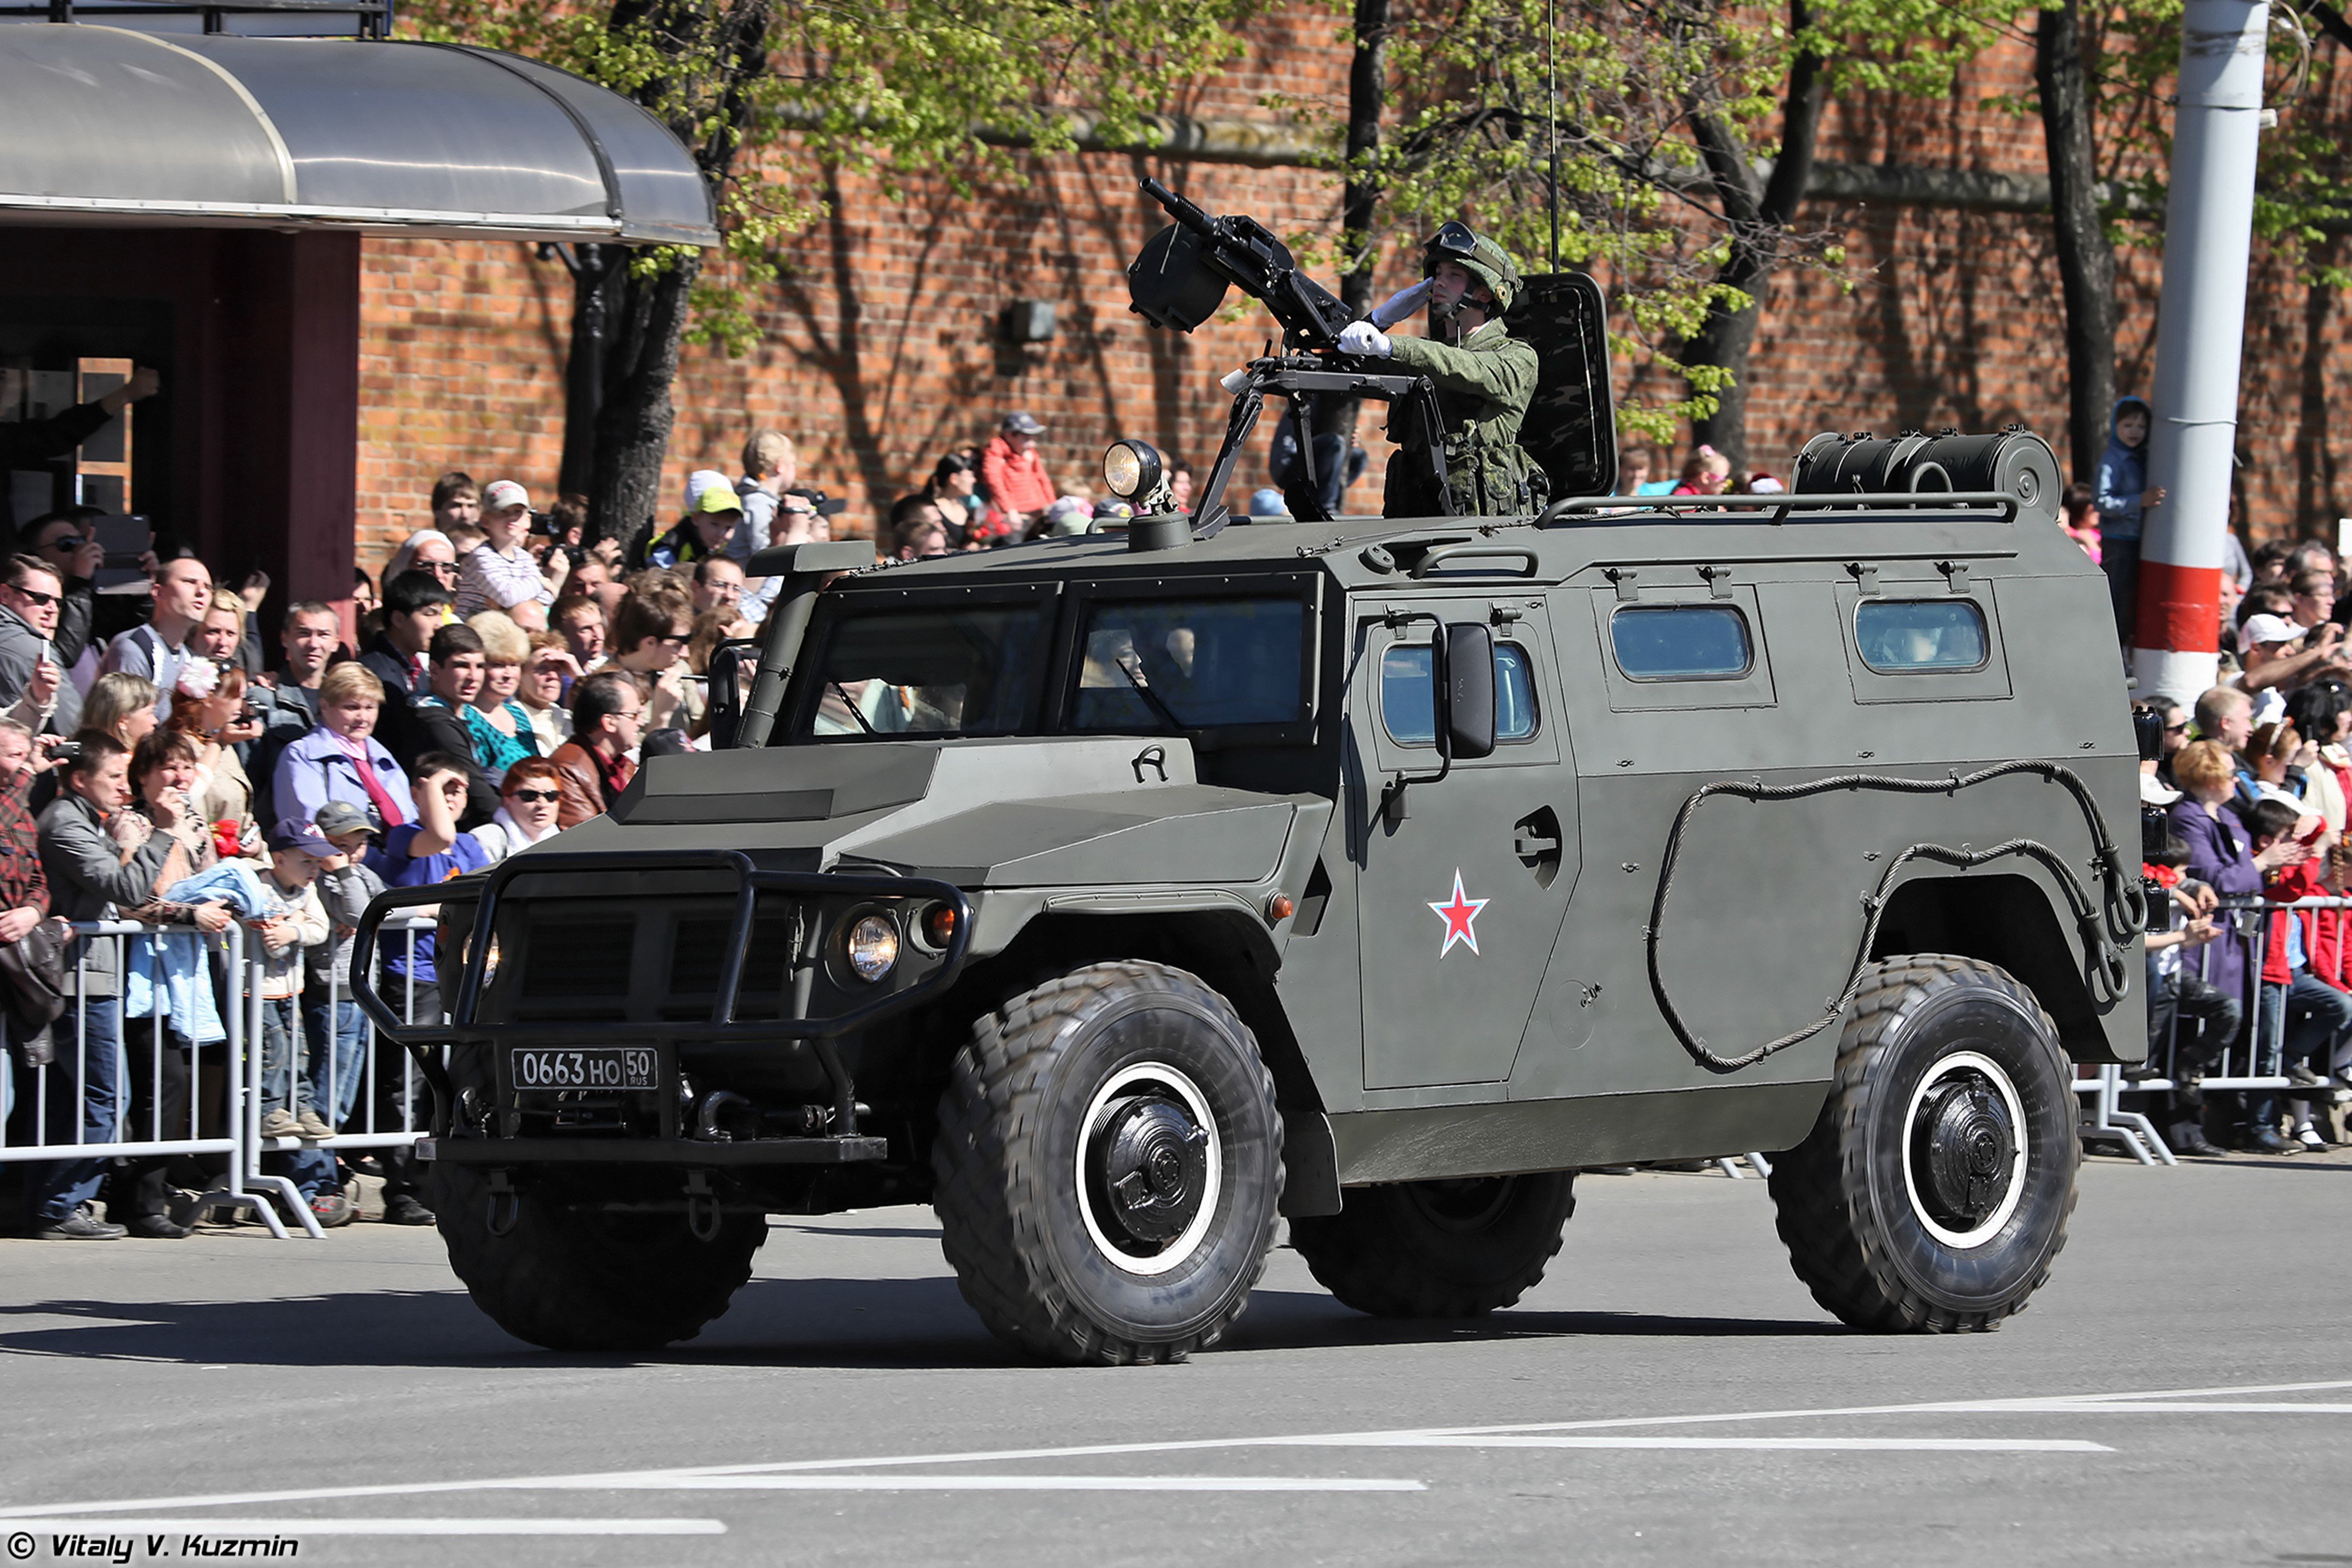 2014, Victory, Day, Parade in nizhny novgorod, Russia, Military, Russian, Army, Red star, Amn, 233114, Tigr m, Armored, Vehicle, 2, 4000x2667 Wallpaper